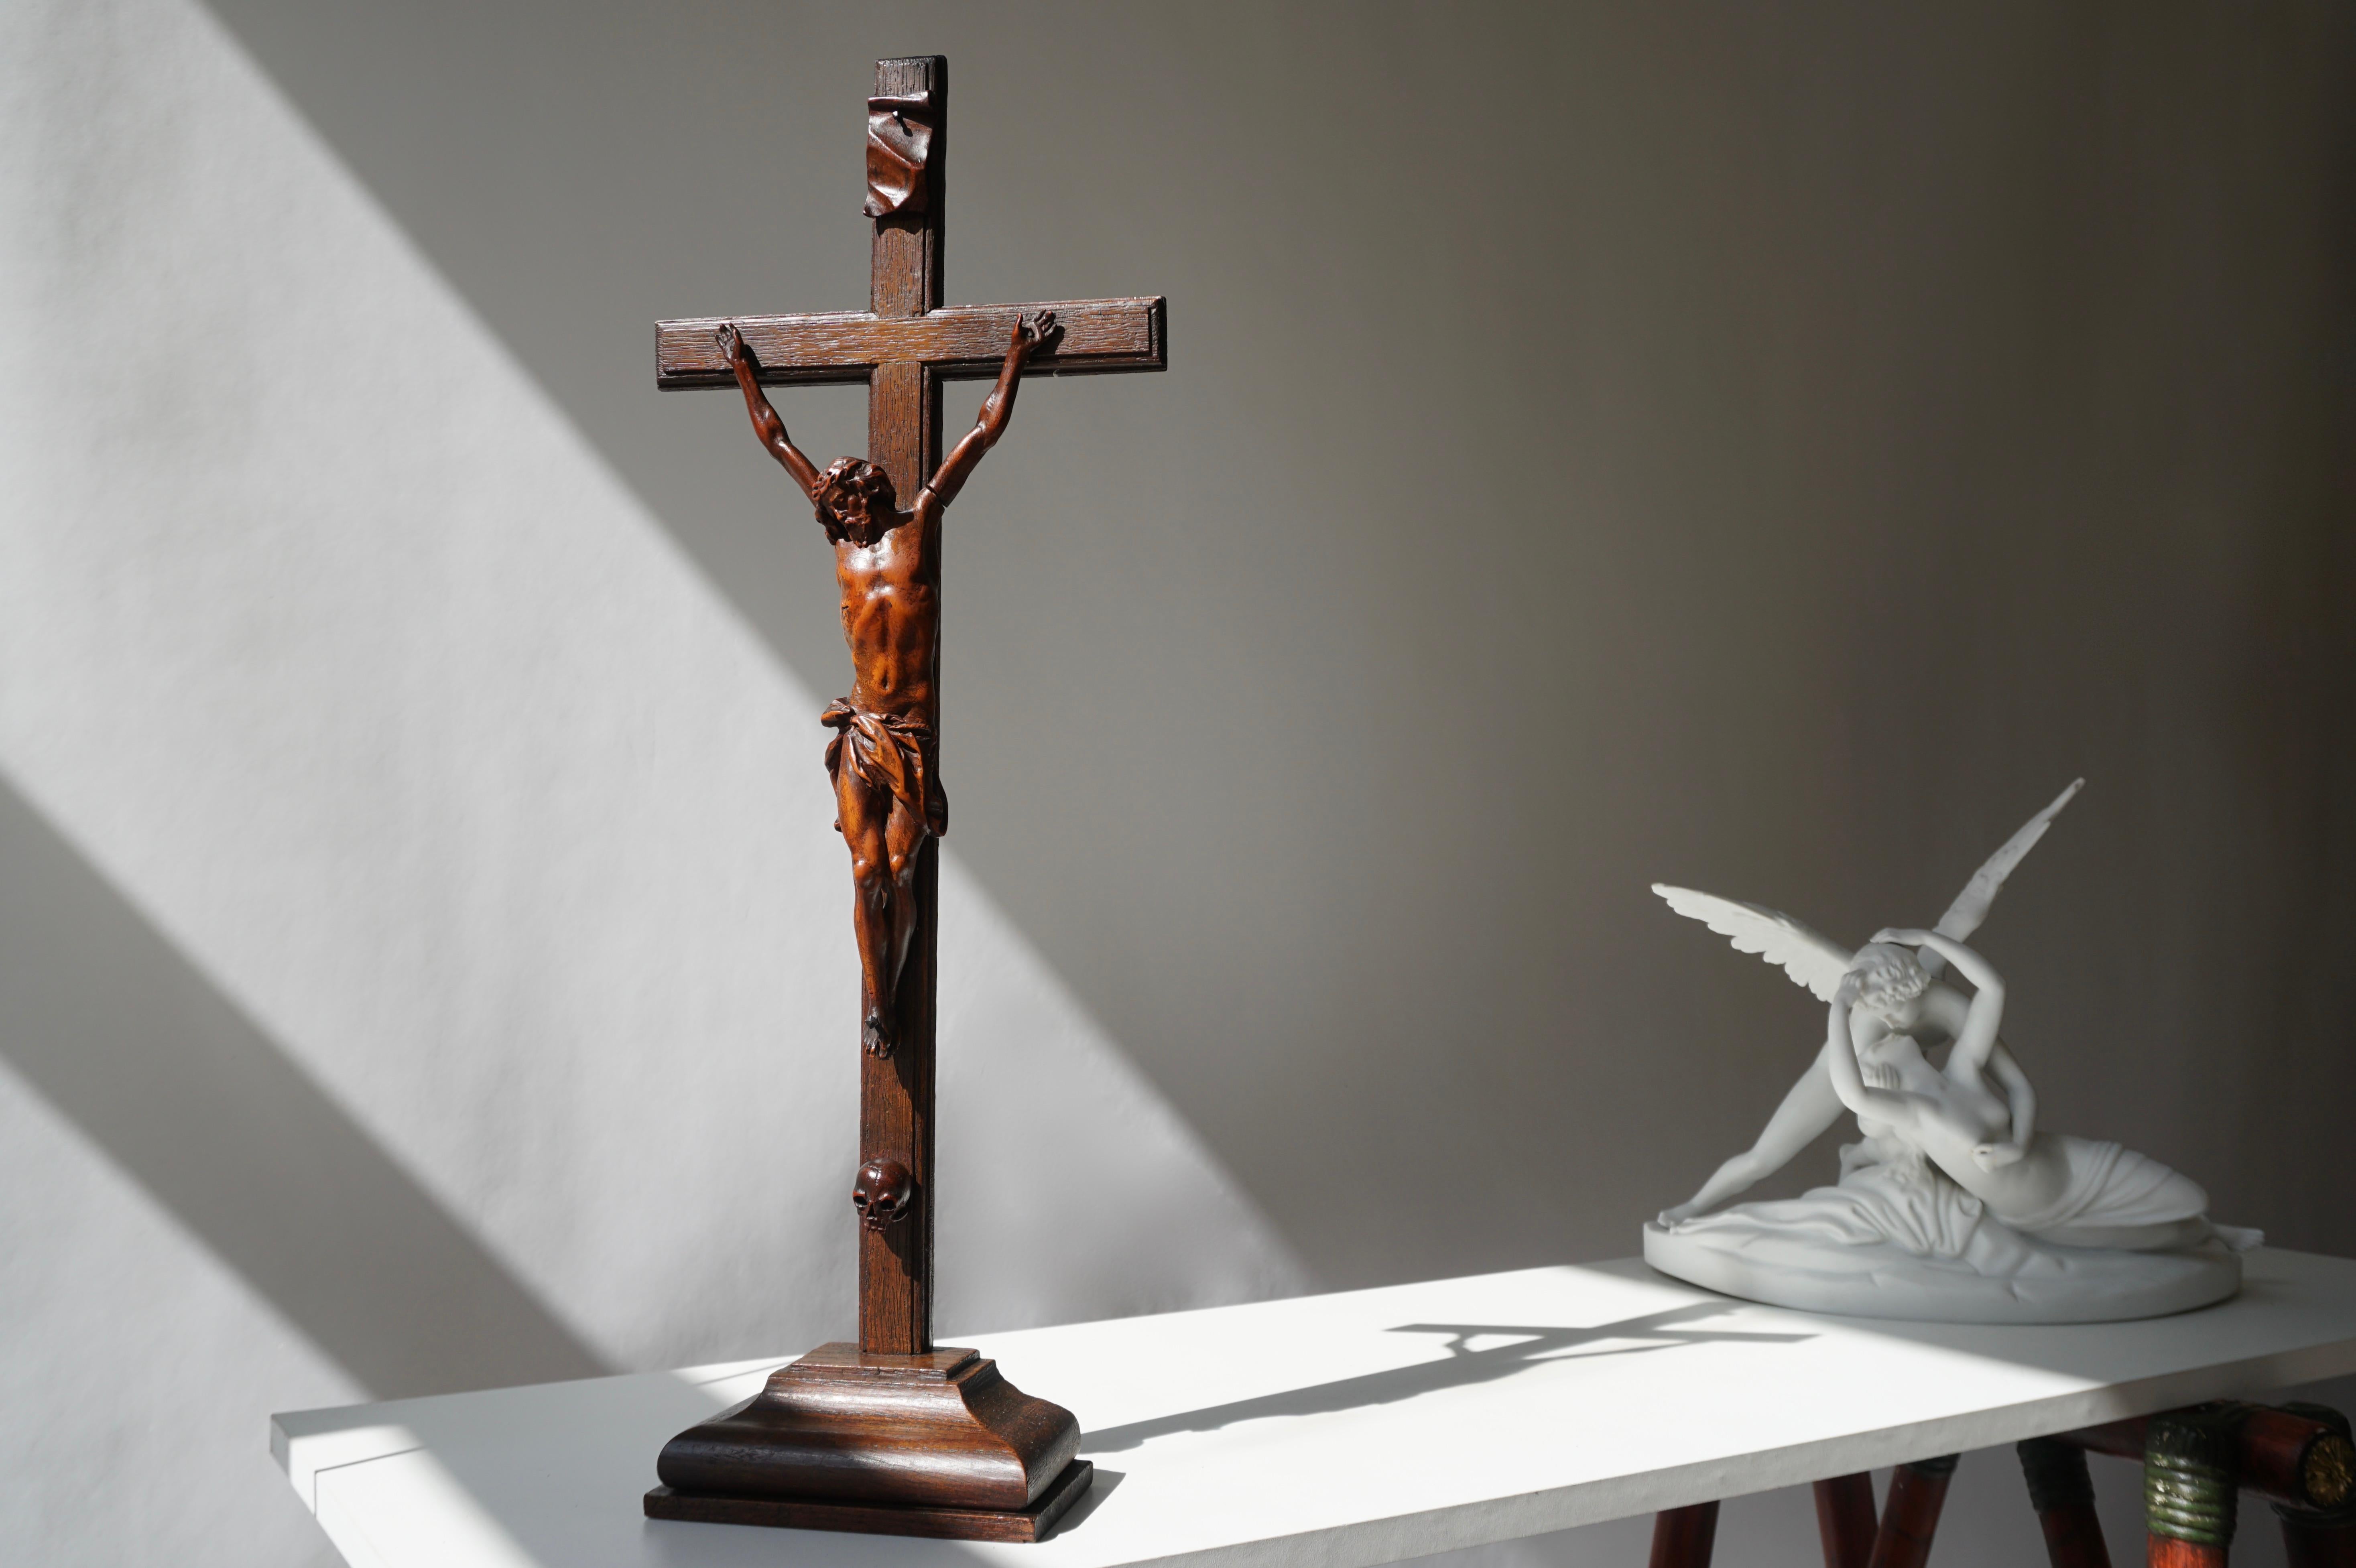 19th century crucifix or corpus Christi made from wood. Wooden cross with a nice patina and an exquisite shape.
This item depicts the Christ in his last agony on the cross, after being crucified.
Originates Belgium, dating circa 1880.
Measure: